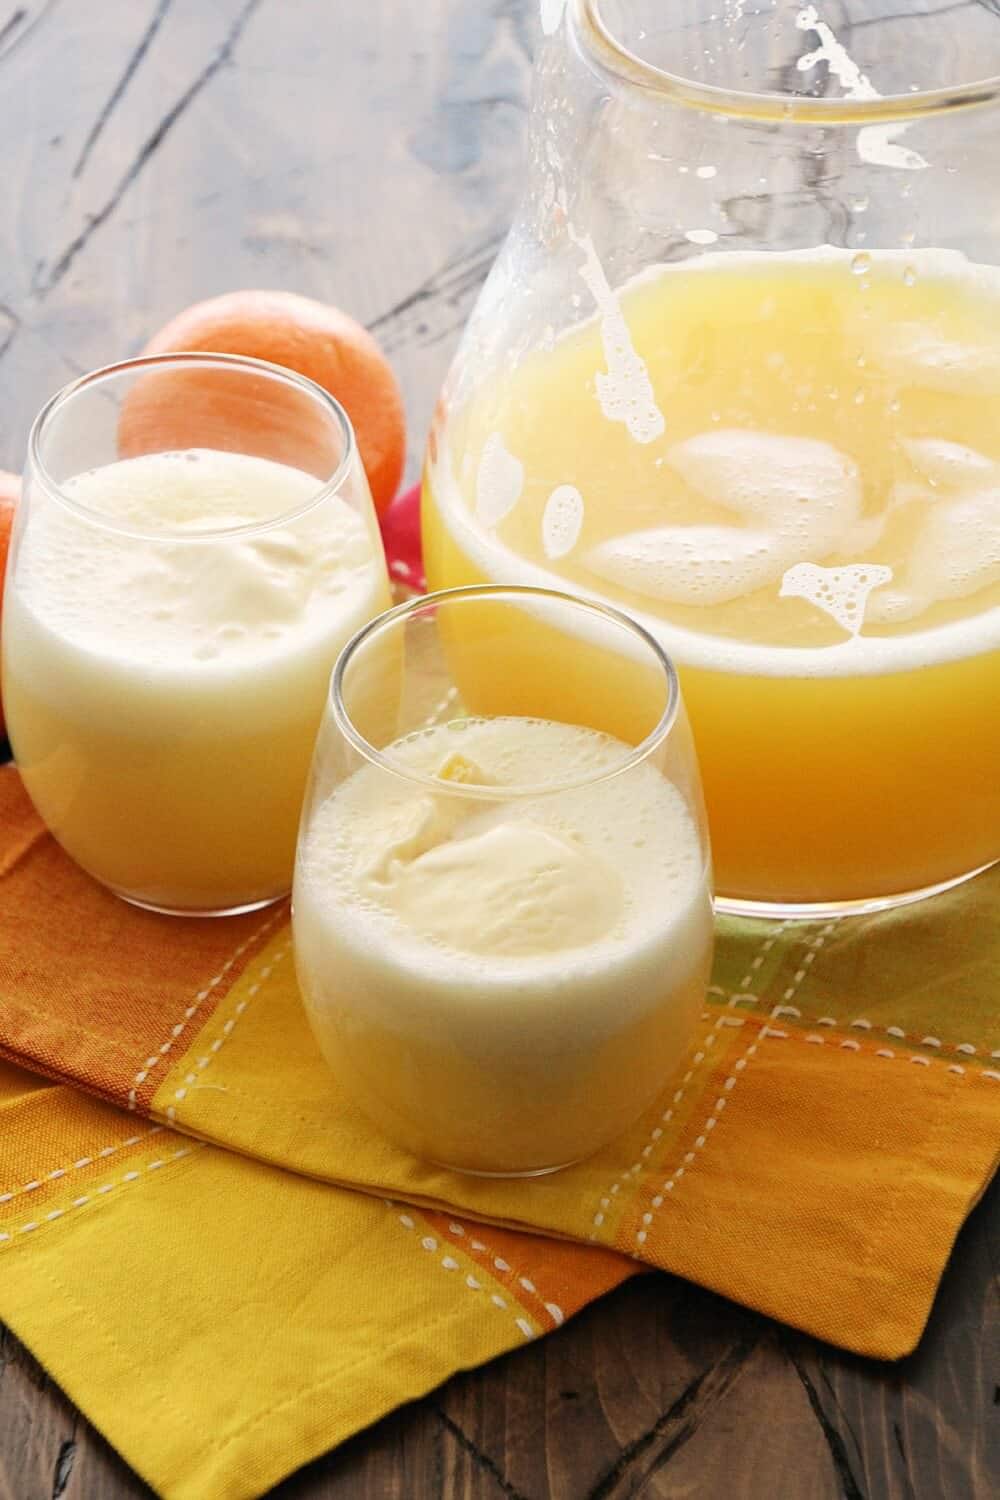 Mimosa Floats ~ Your Favorite Mimosa Dressed Up with Ice Cream! How Can You Not Love This?